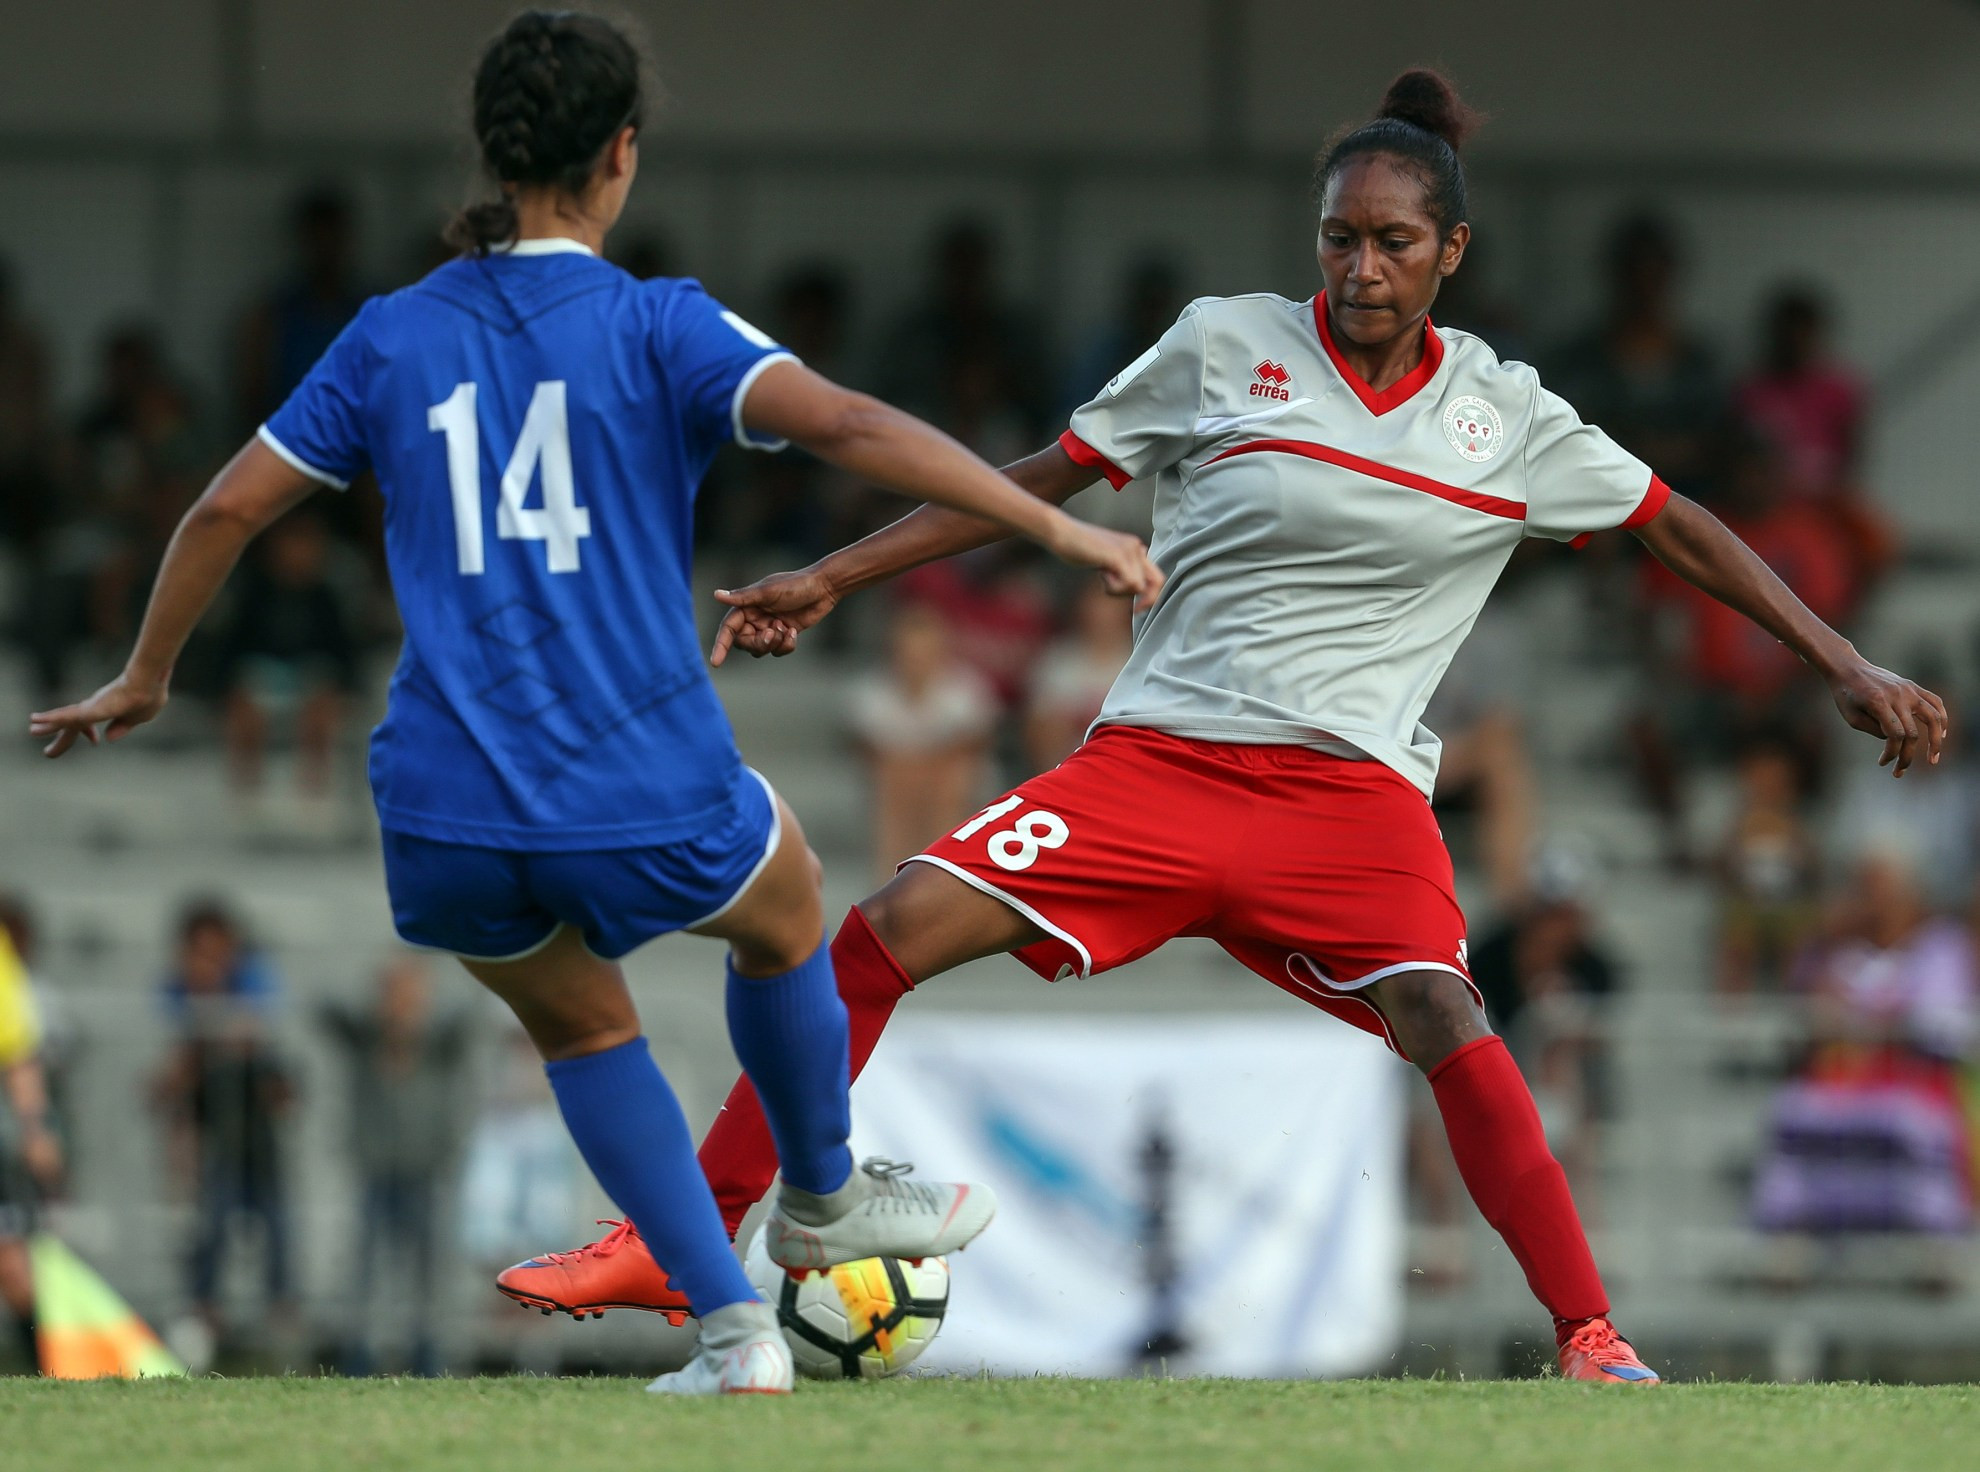 New Caledonia have made it into the sem-finals of the Oceania Football Confederation Women's Nations Cup ©OFC